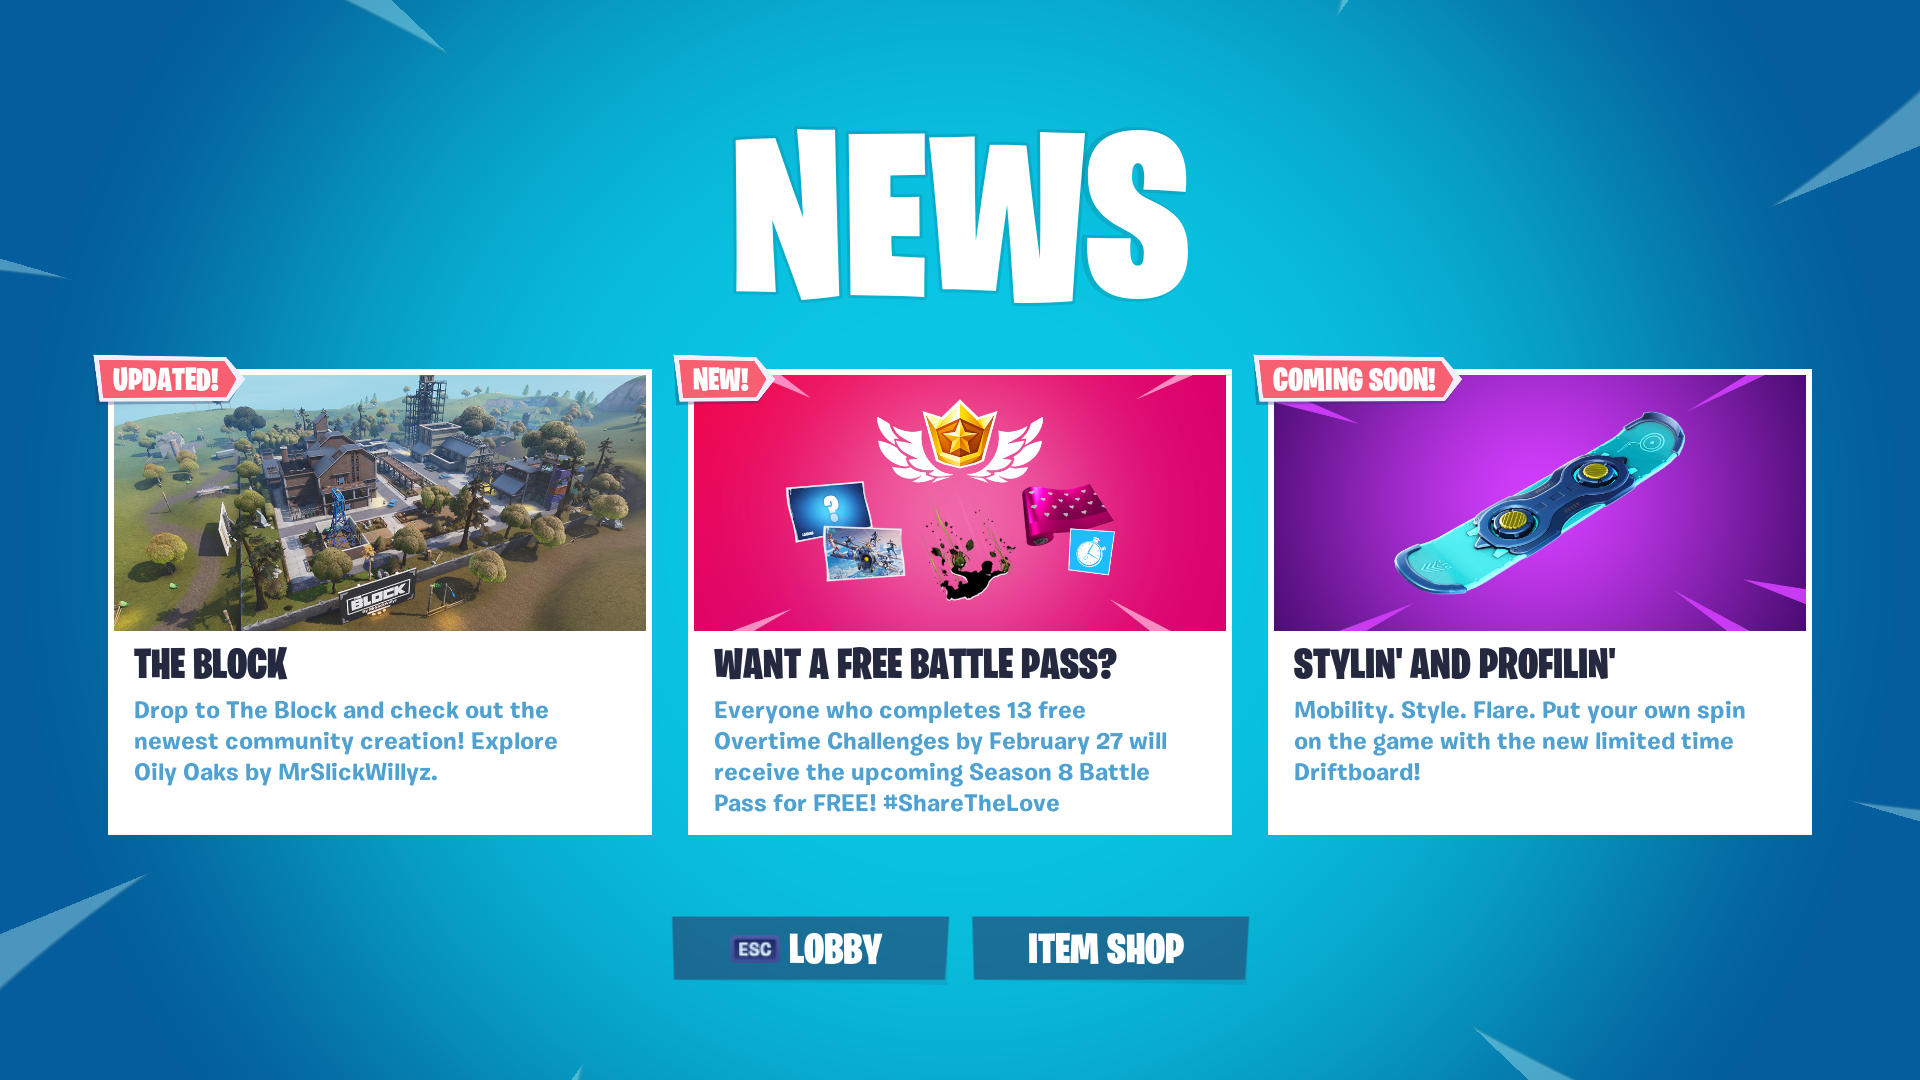 psa fortnite v7 40 content update arrives tomorrow morning fortnite news and statistics ss1 - what is the block on fortnite season 8